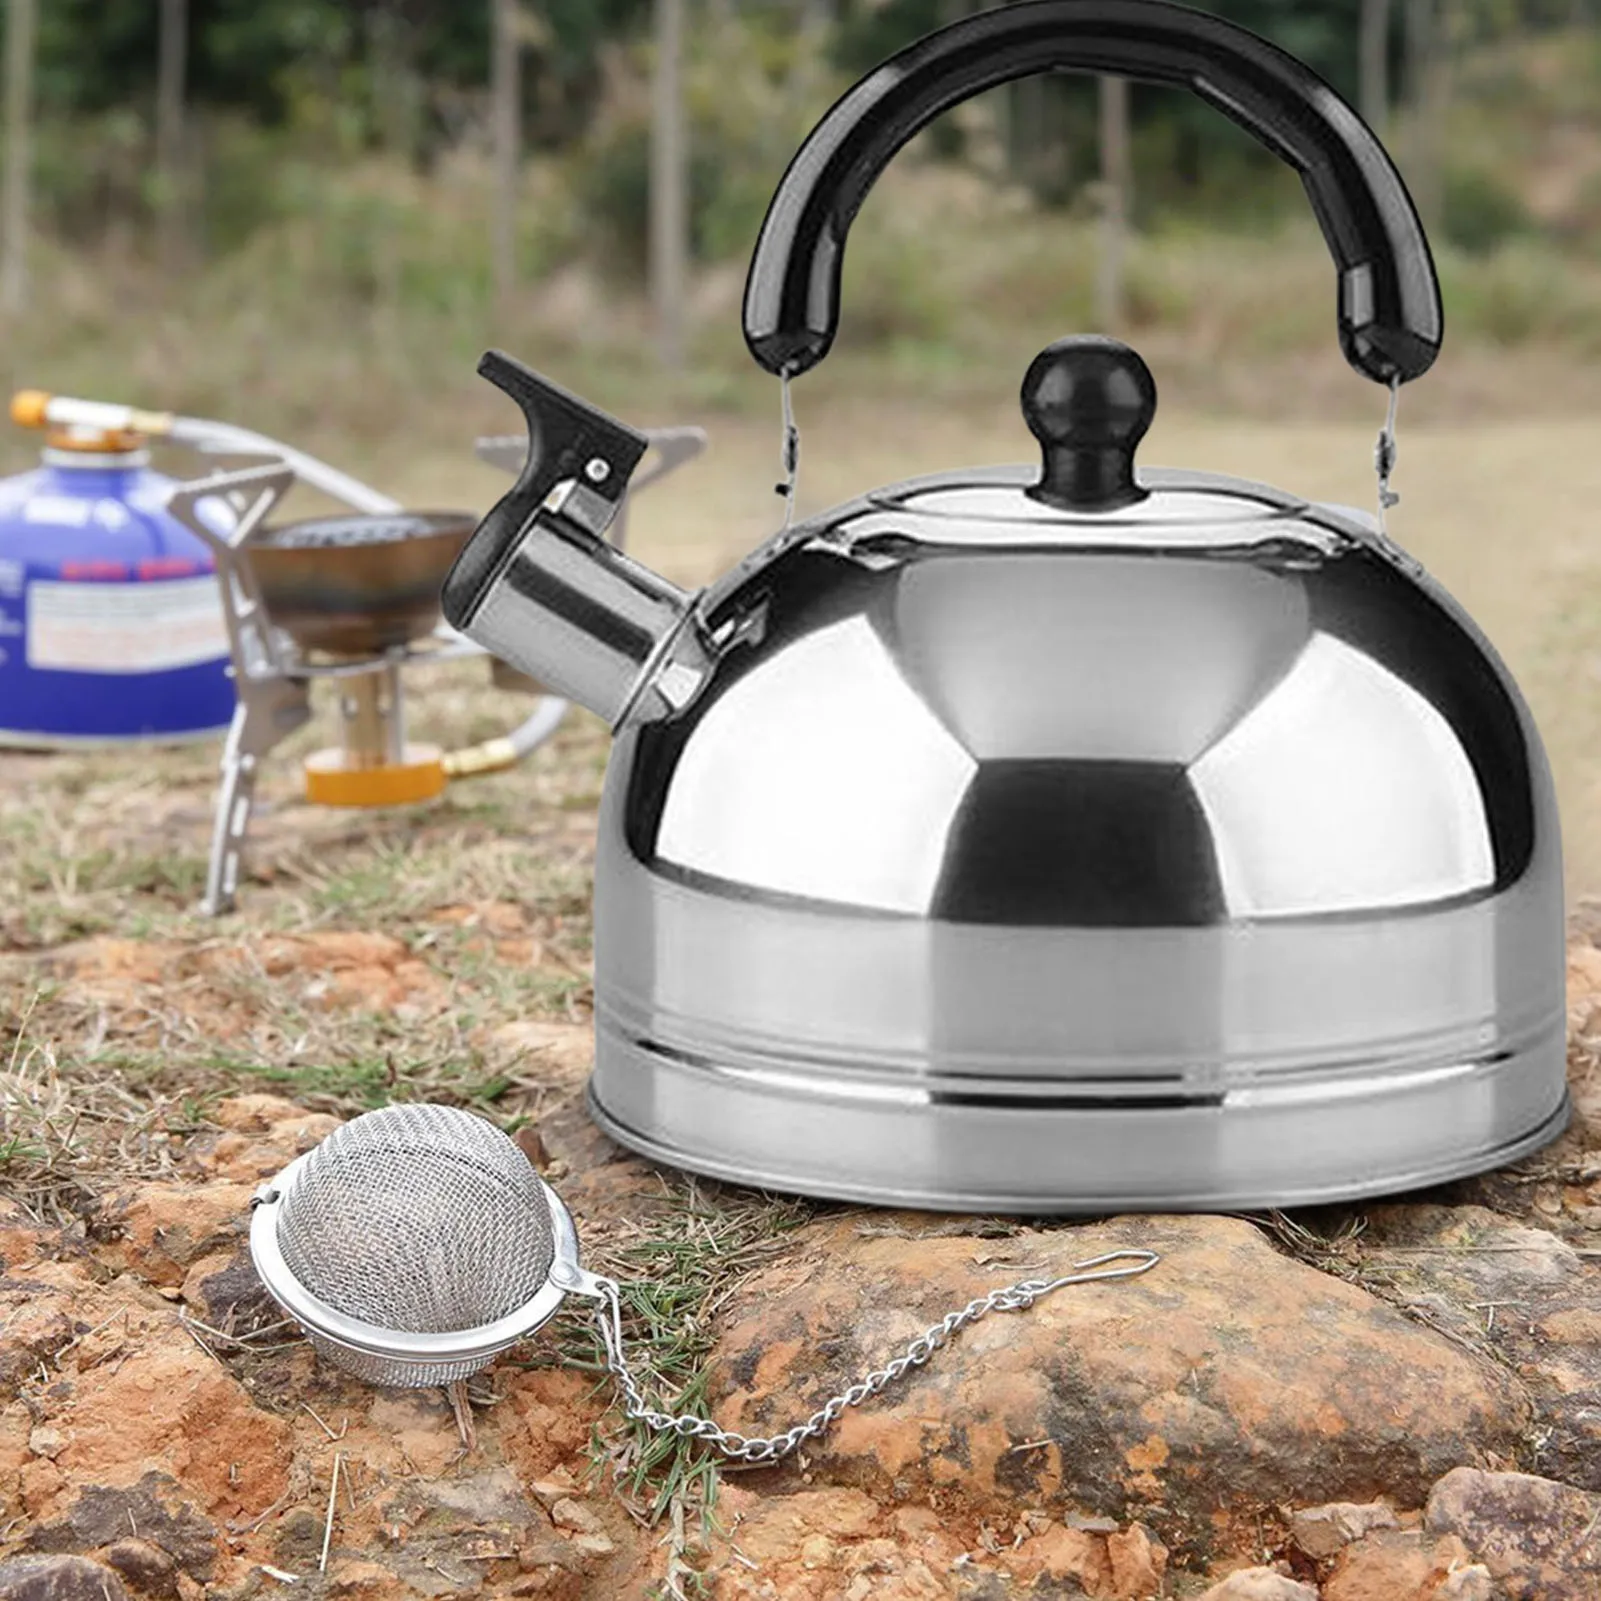 https://ae01.alicdn.com/kf/S75907dadd3d54e23a59ef1b20b05615ek/Whistling-Tea-Kettle-Food-Grade-Stainless-Steel-Water-Boiler-For-Stove-Top-With-Heat-Proof-Folding.jpg